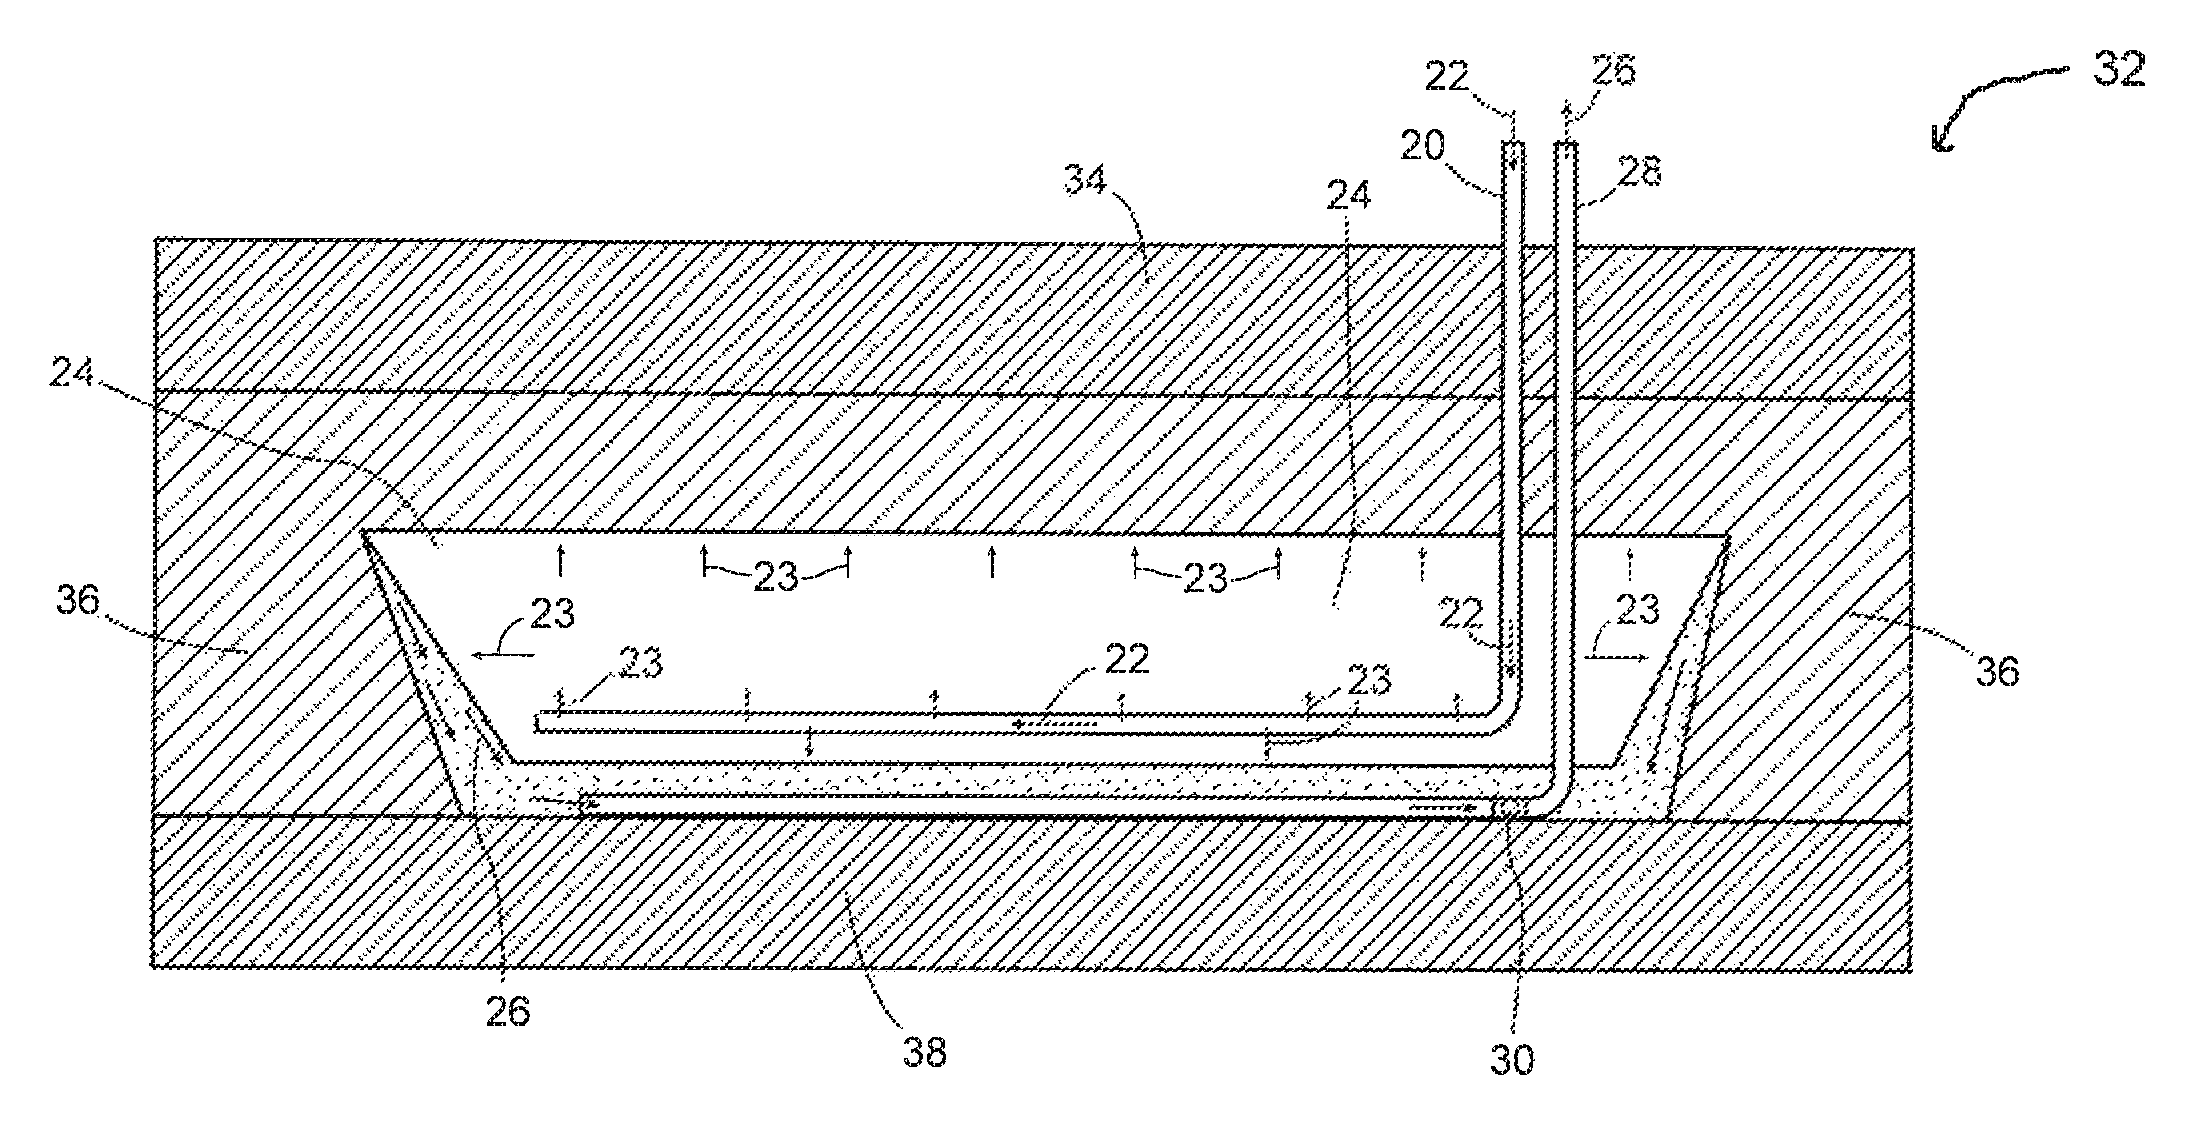 Method of controlling growth and heat loss of an in situ gravity draining chamber formed with a condensing solvent process